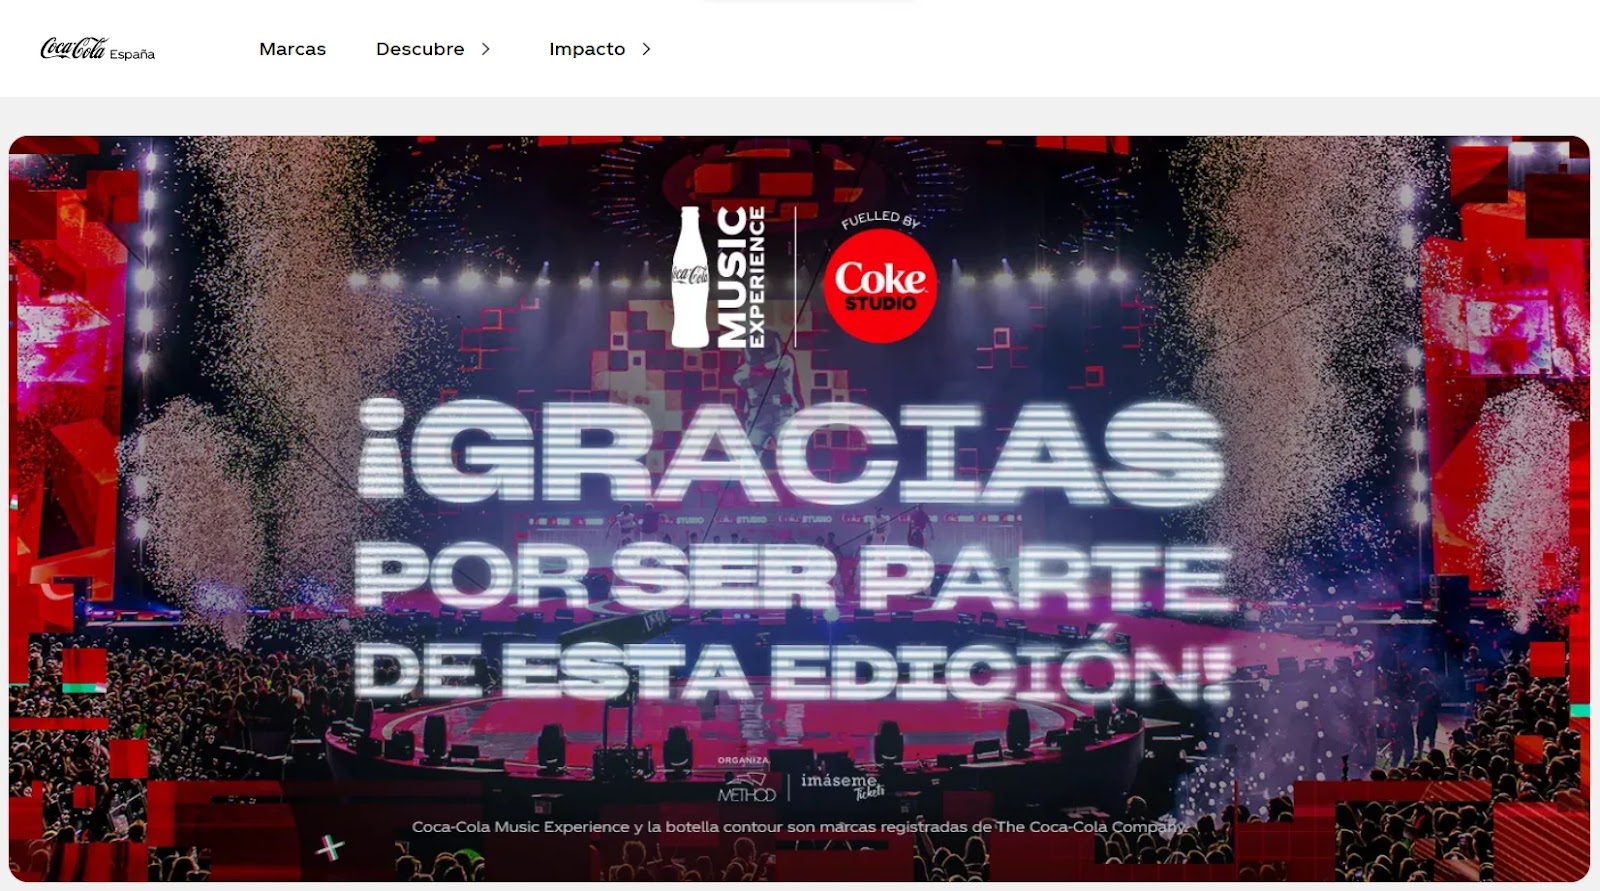 Coca-Cola’s homepage in Spain